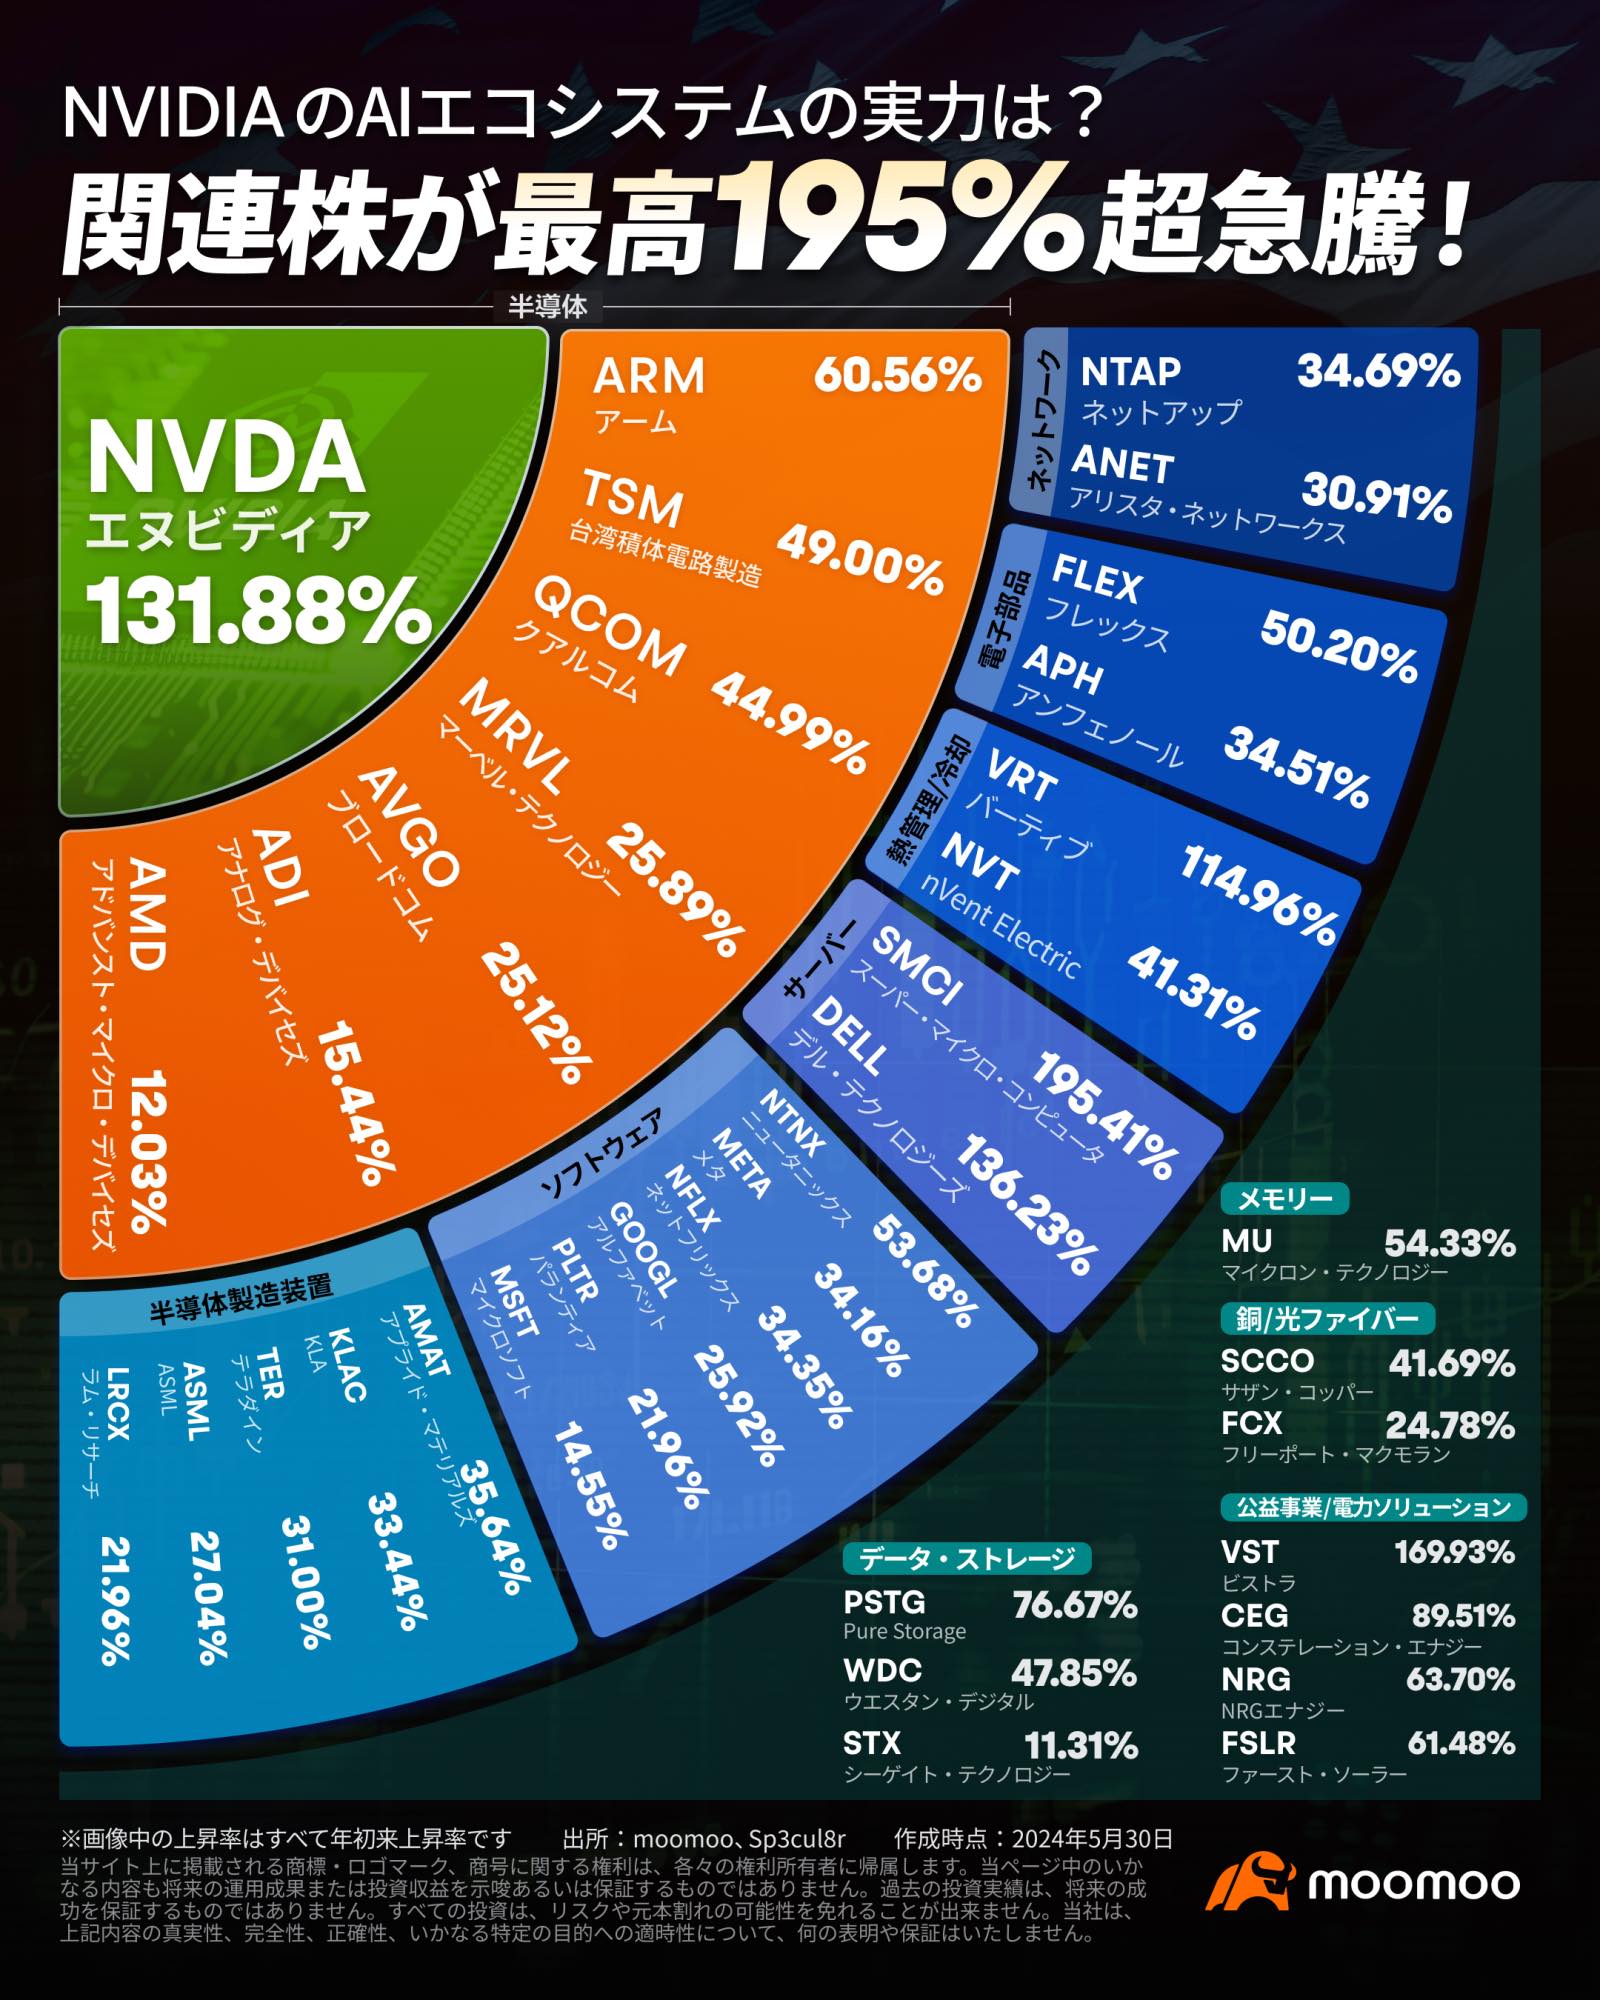 NVIDIA related stocks are growing rapidly ❣️